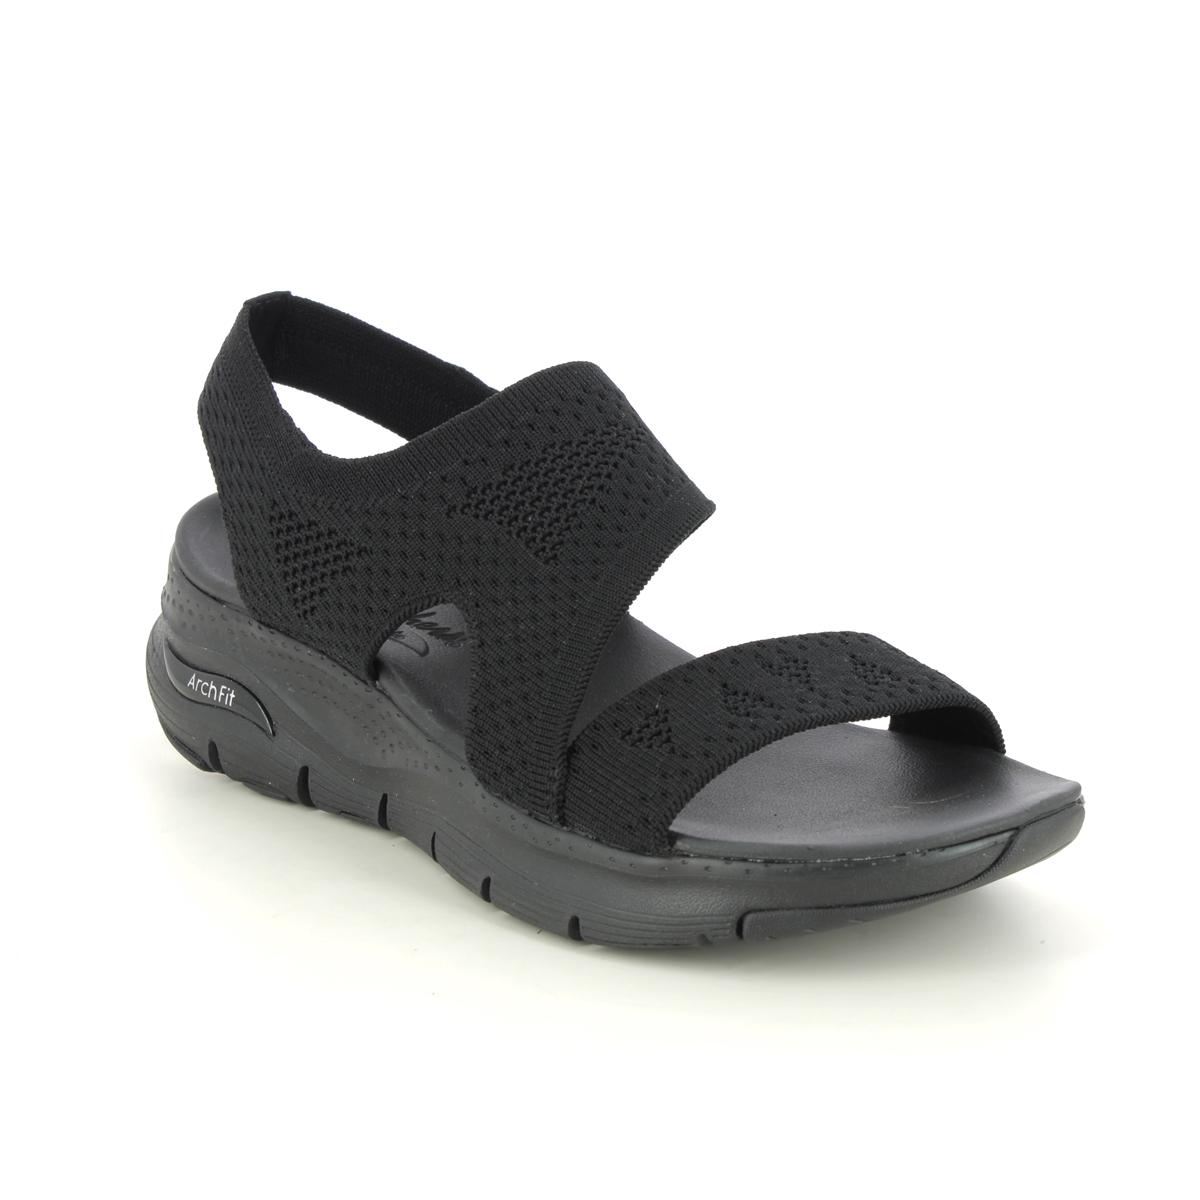 Skechers Arch Fit Sling BBK Black Womens Comfortable Sandals 119458 in a Plain Textile in Size 4